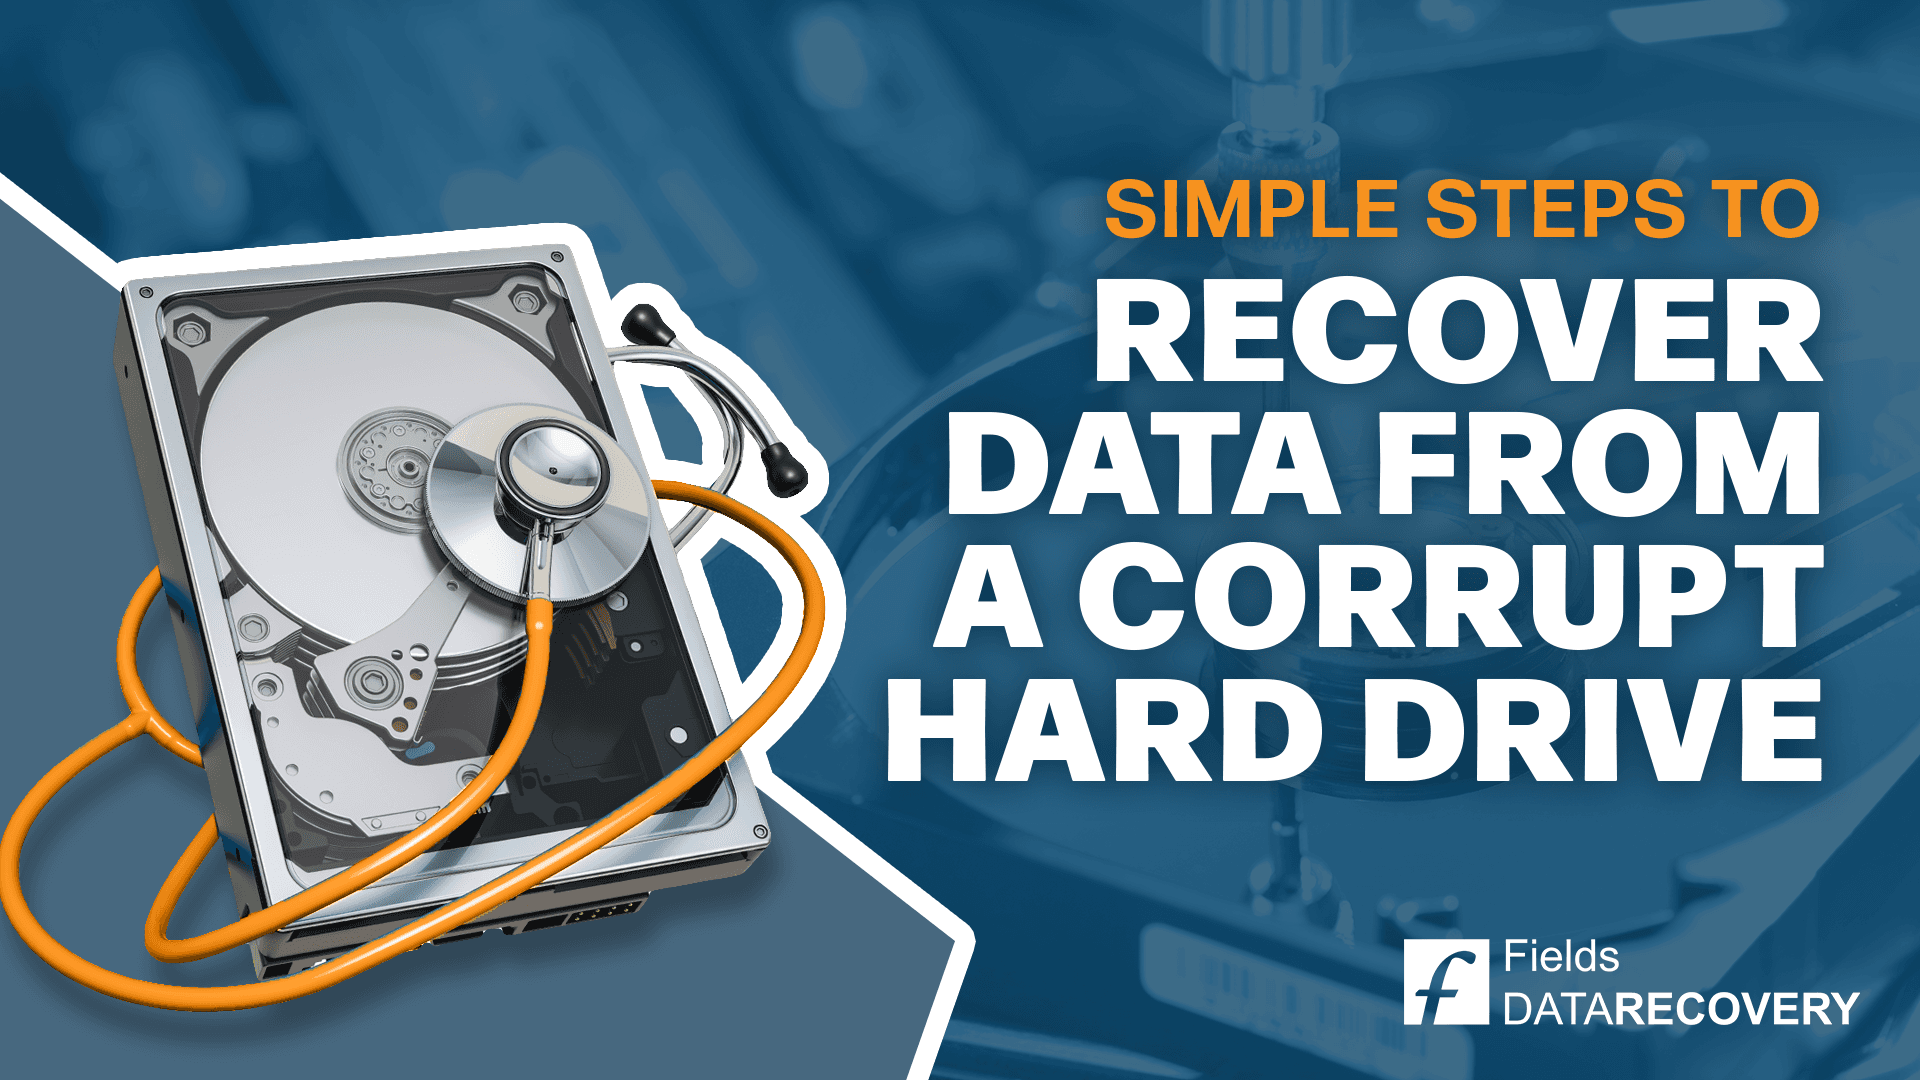 Simple Steps to Recover Data from a Corrupt Hard Drive